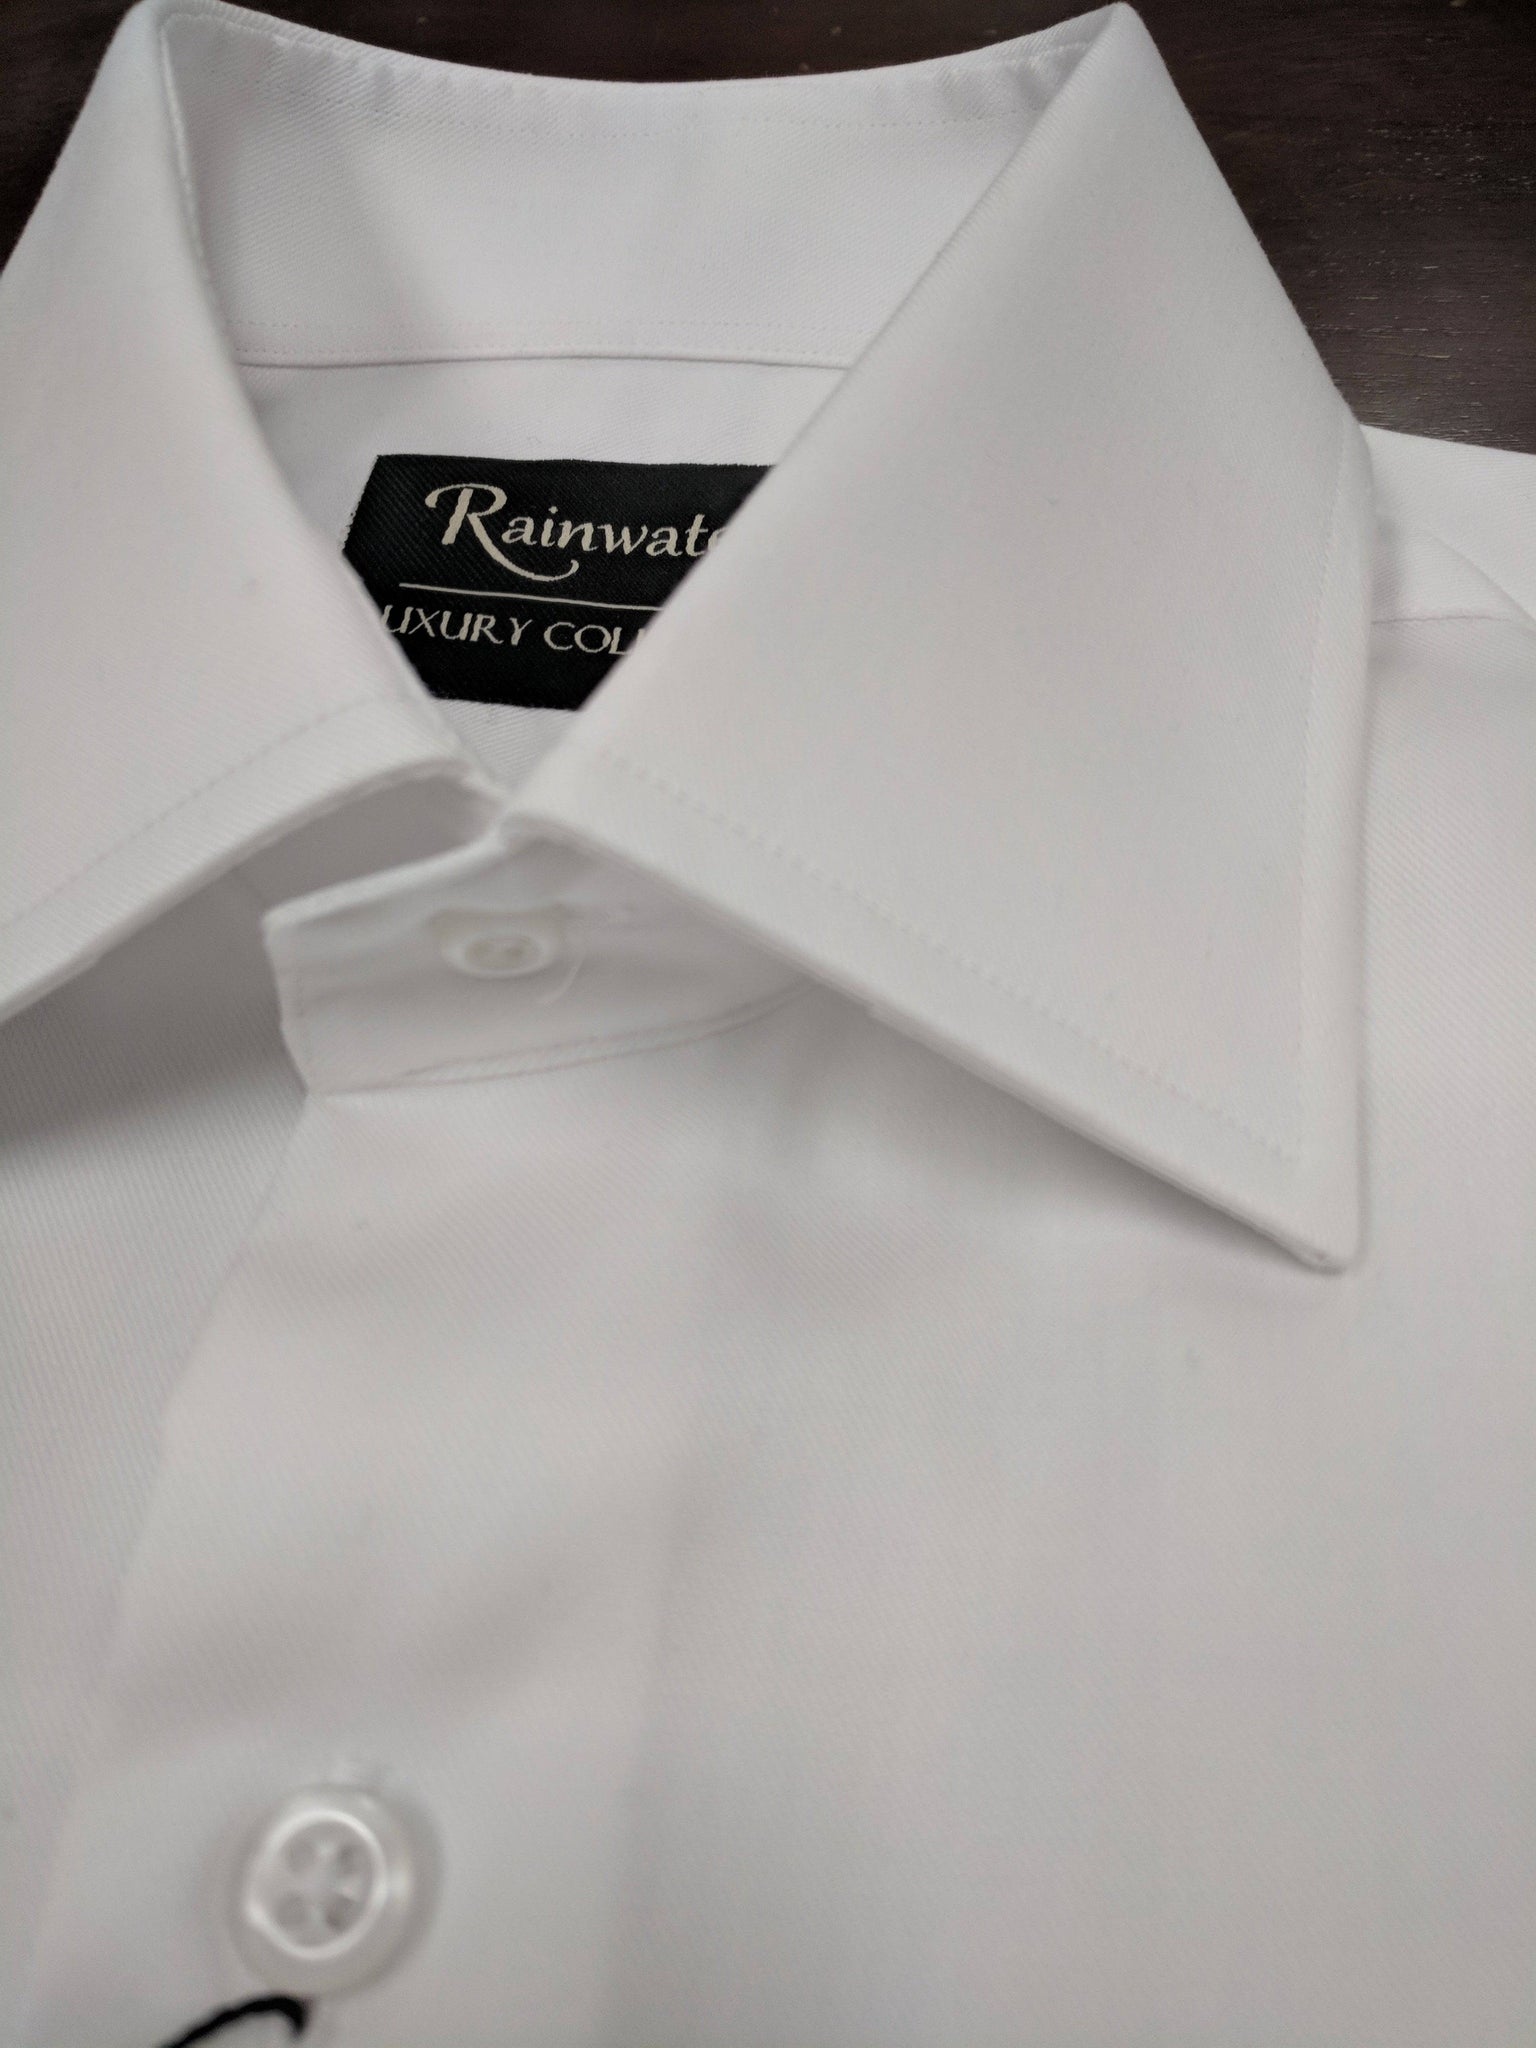 Rainwater's White 100% Cotton Wrinkle Free, Classic Fit, French Cuffs - Dress Shirt - Rainwater's Men's Clothing and Tuxedo Rental